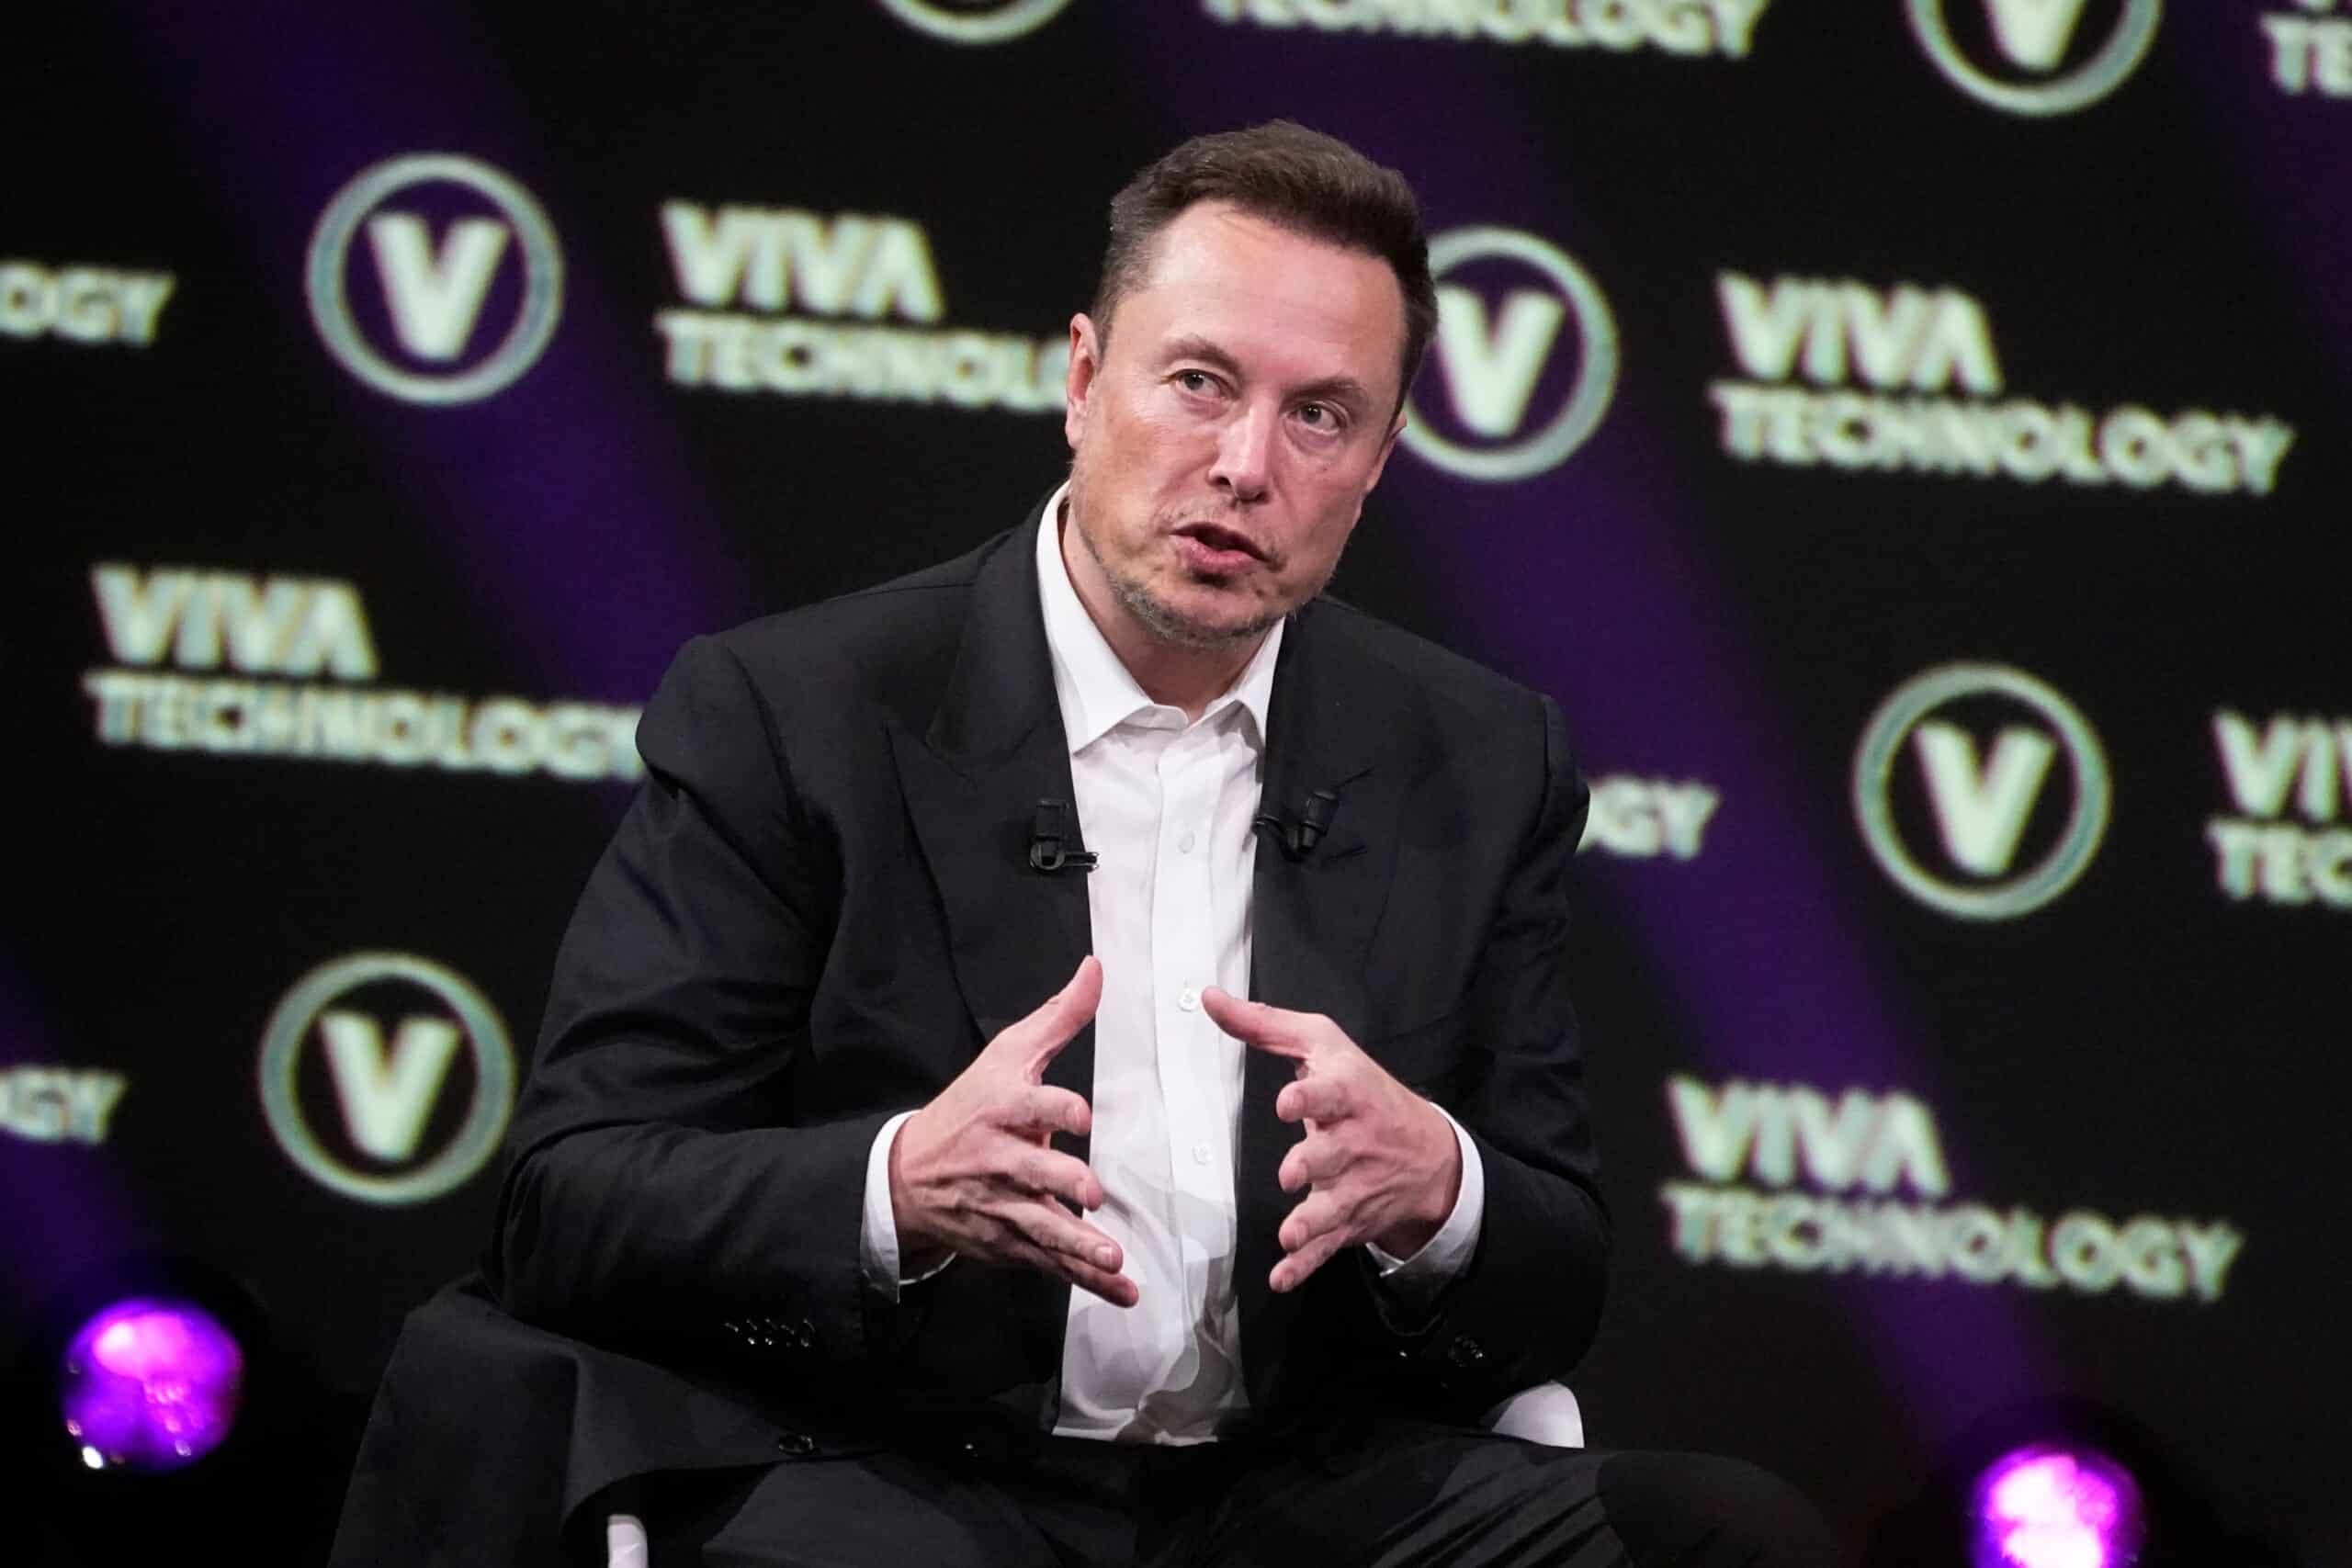 Elon Musk tells advertisers to ‘go f**k themselves’